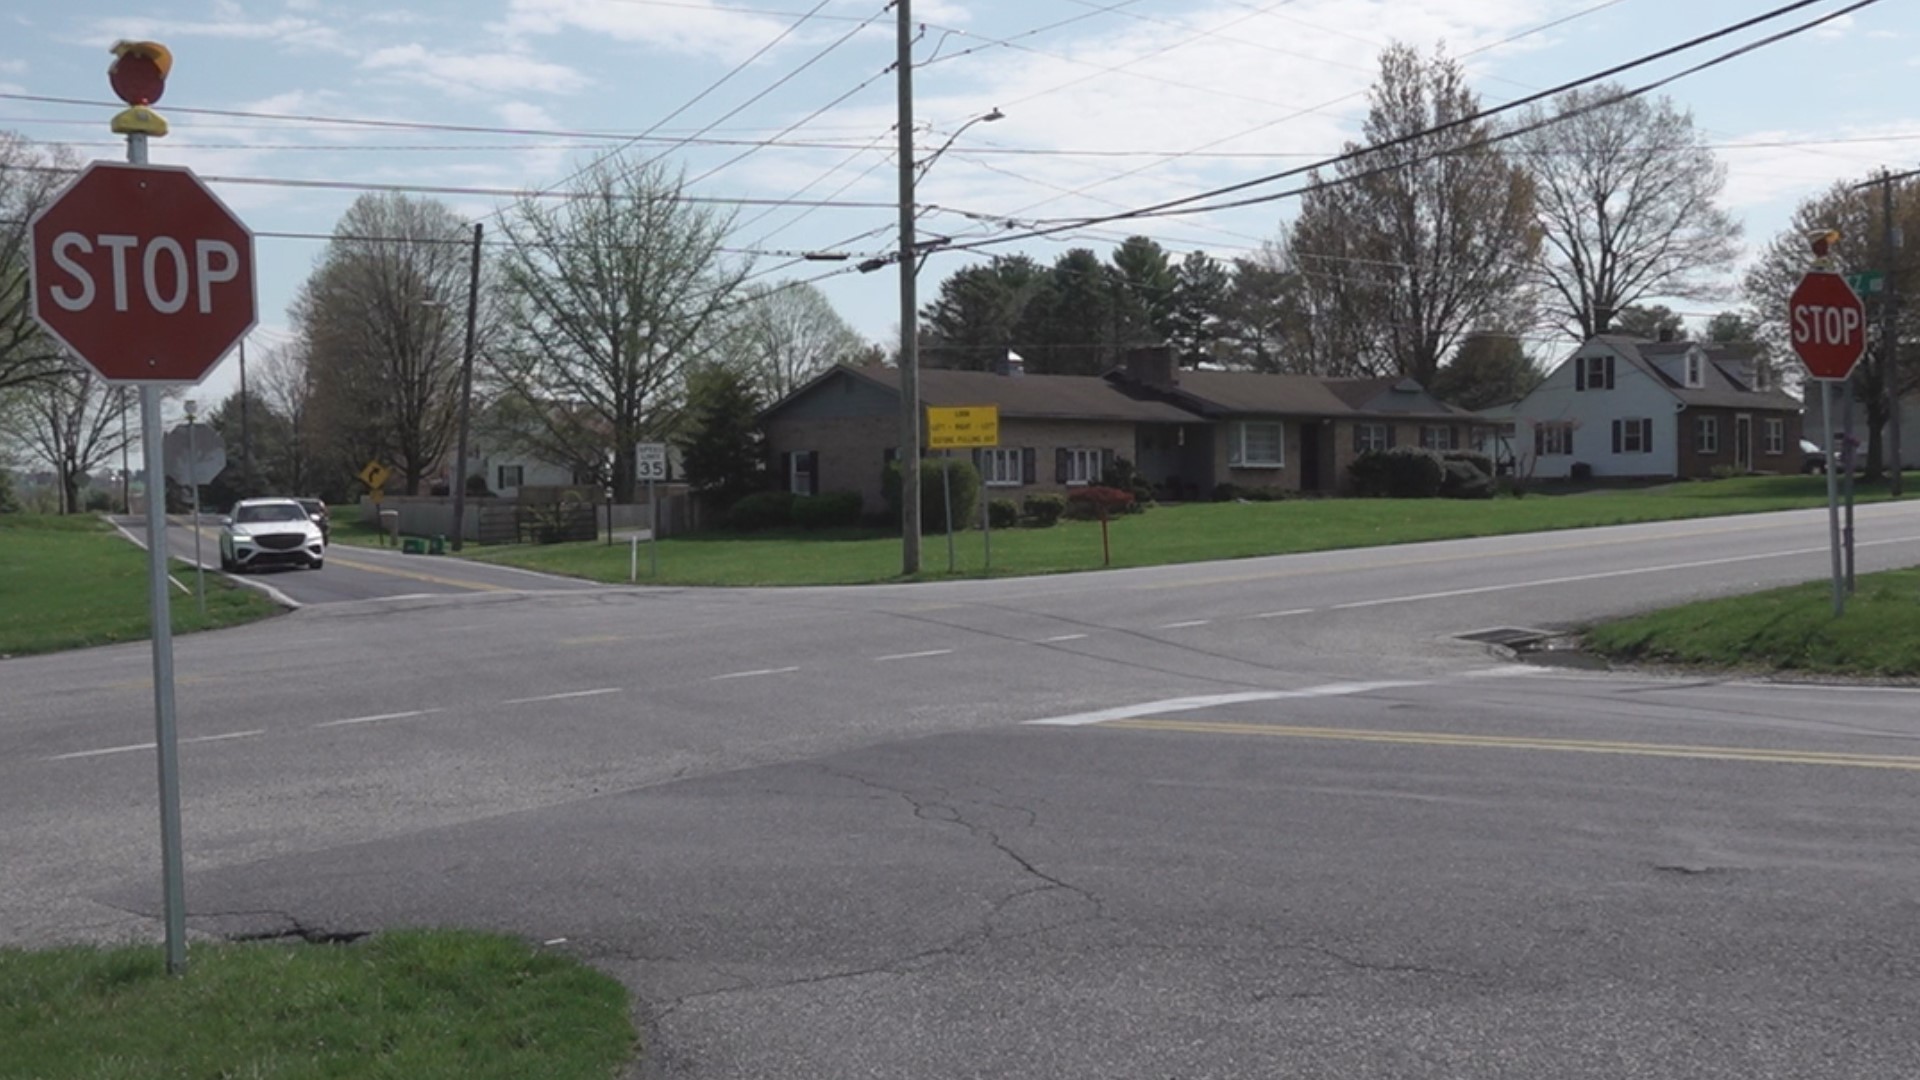 The intersection of Route 72 and Lititz Road saw two fatalities a month apart from each other in 2022.